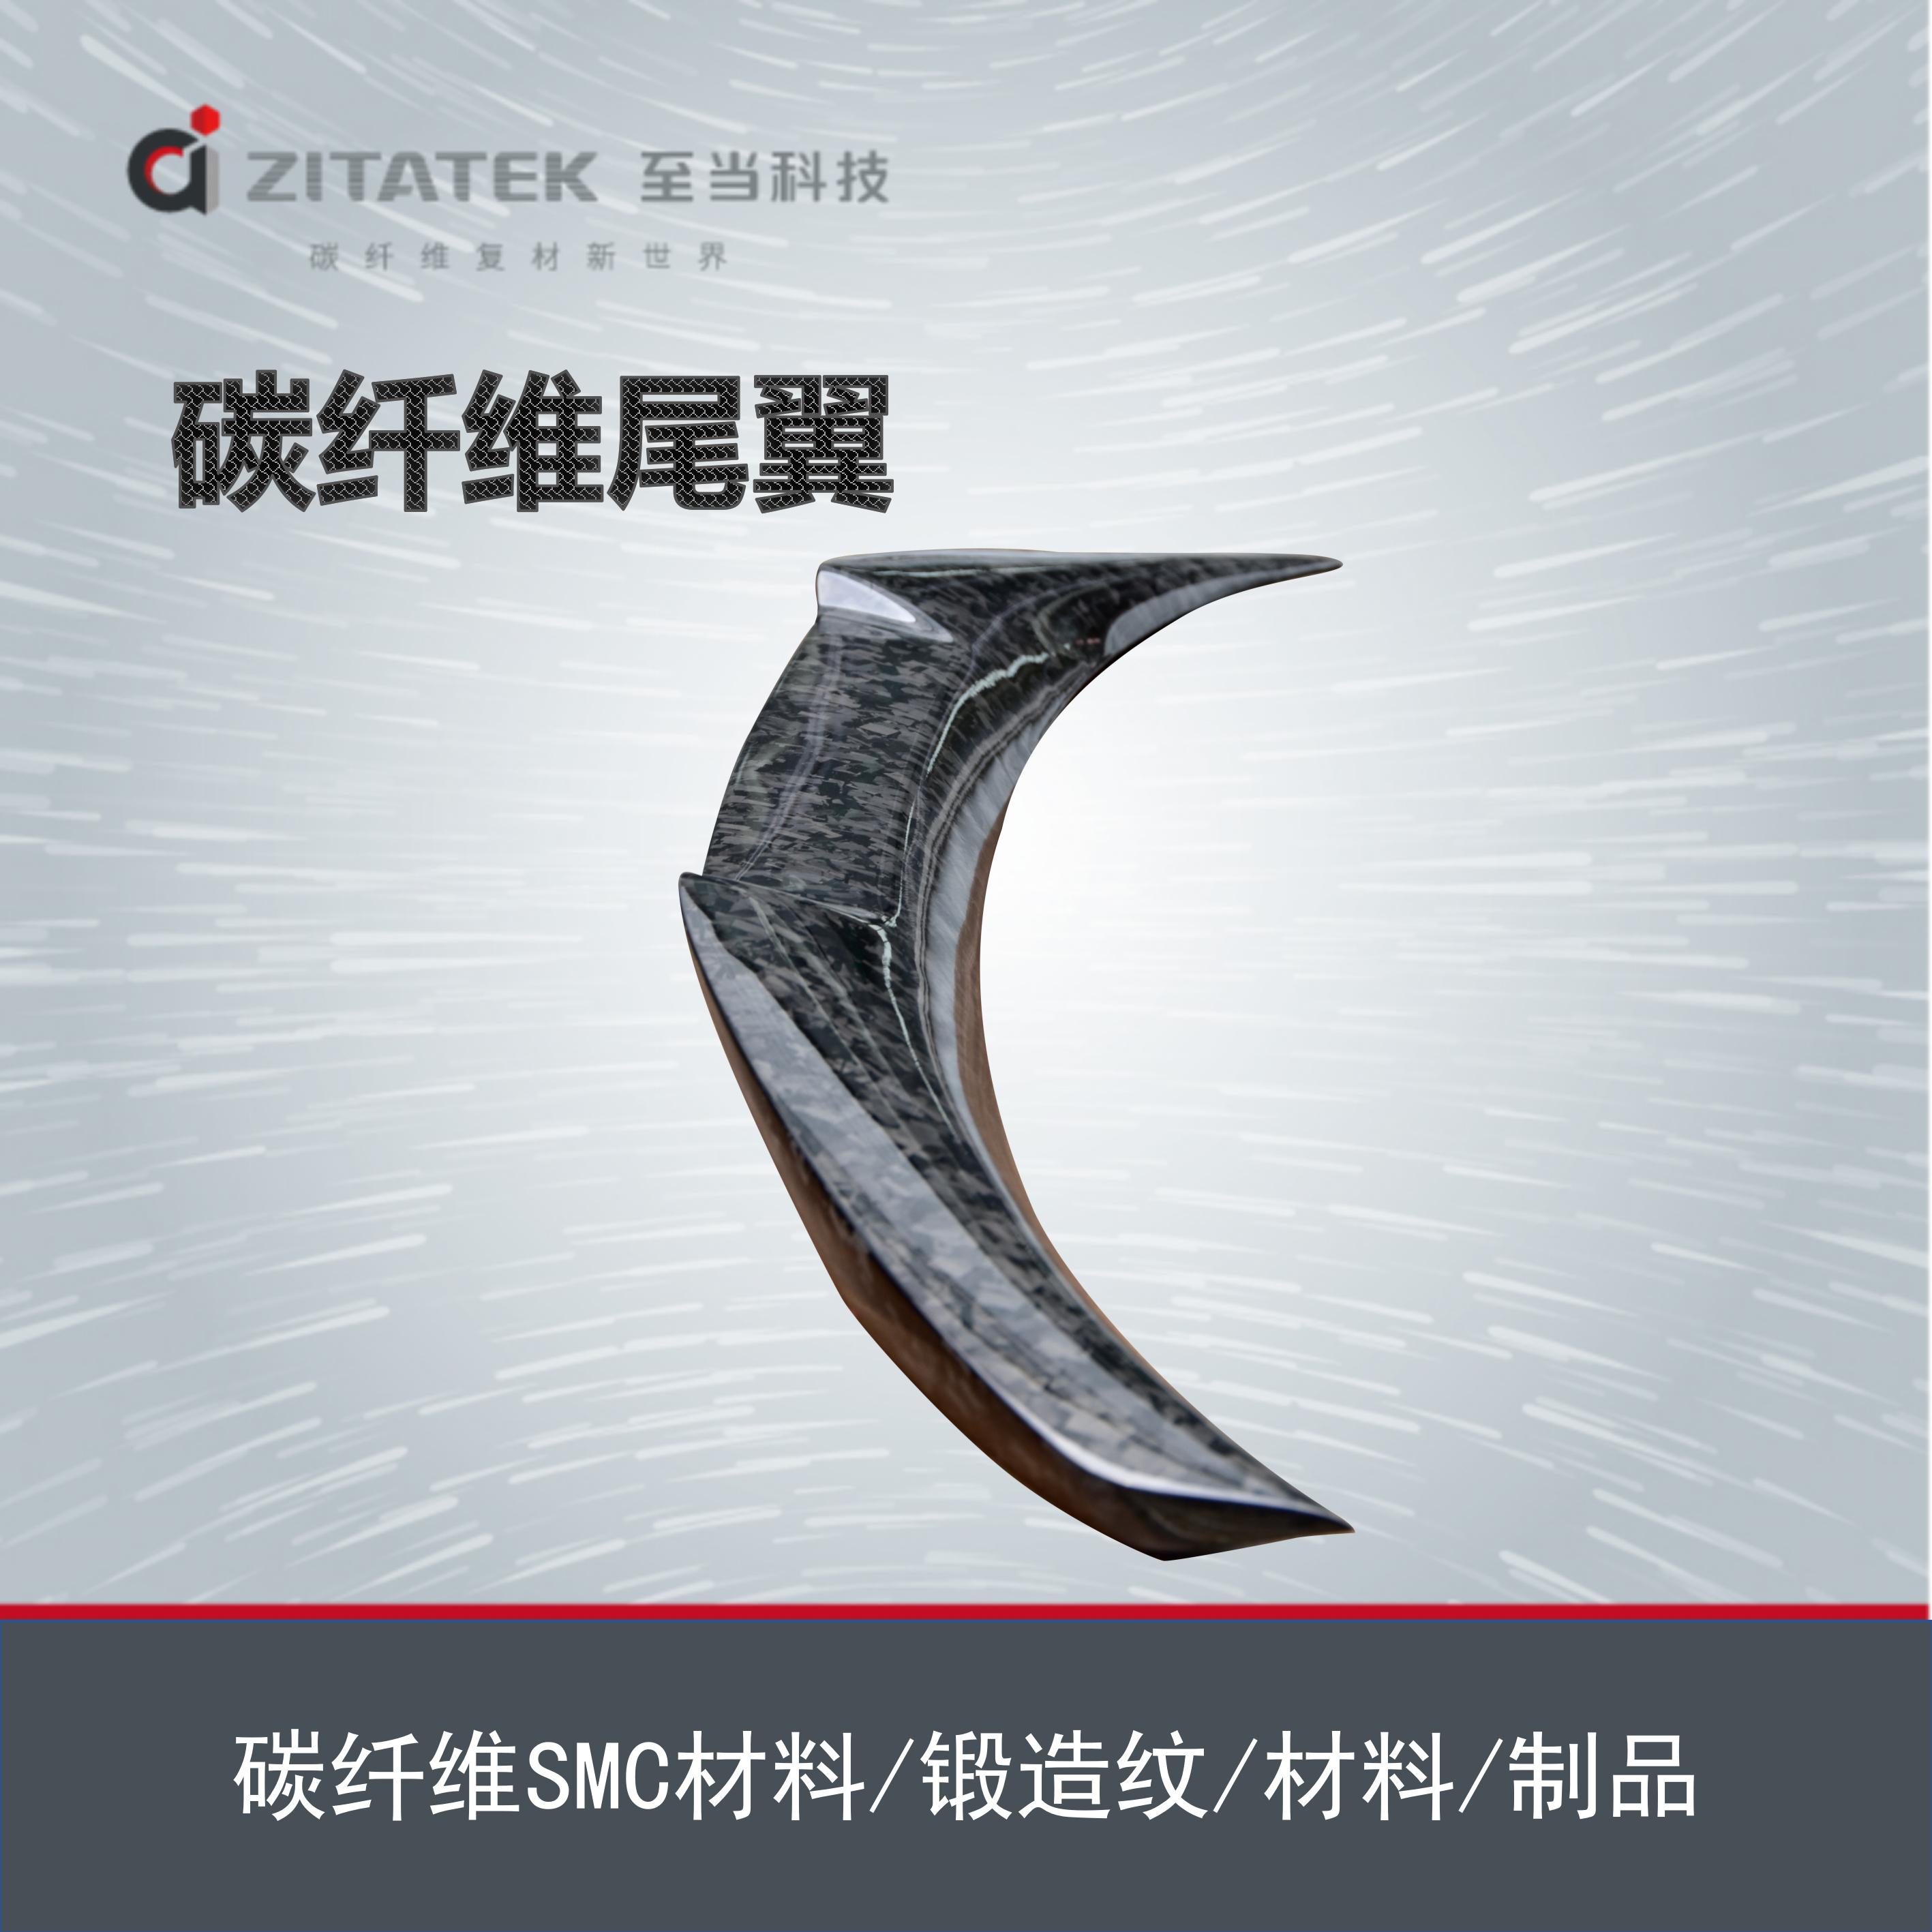 CF-SMC products, short cut carbon fiber products, forged patterns, fatigue resistance, wear resistance, and suitable production supply